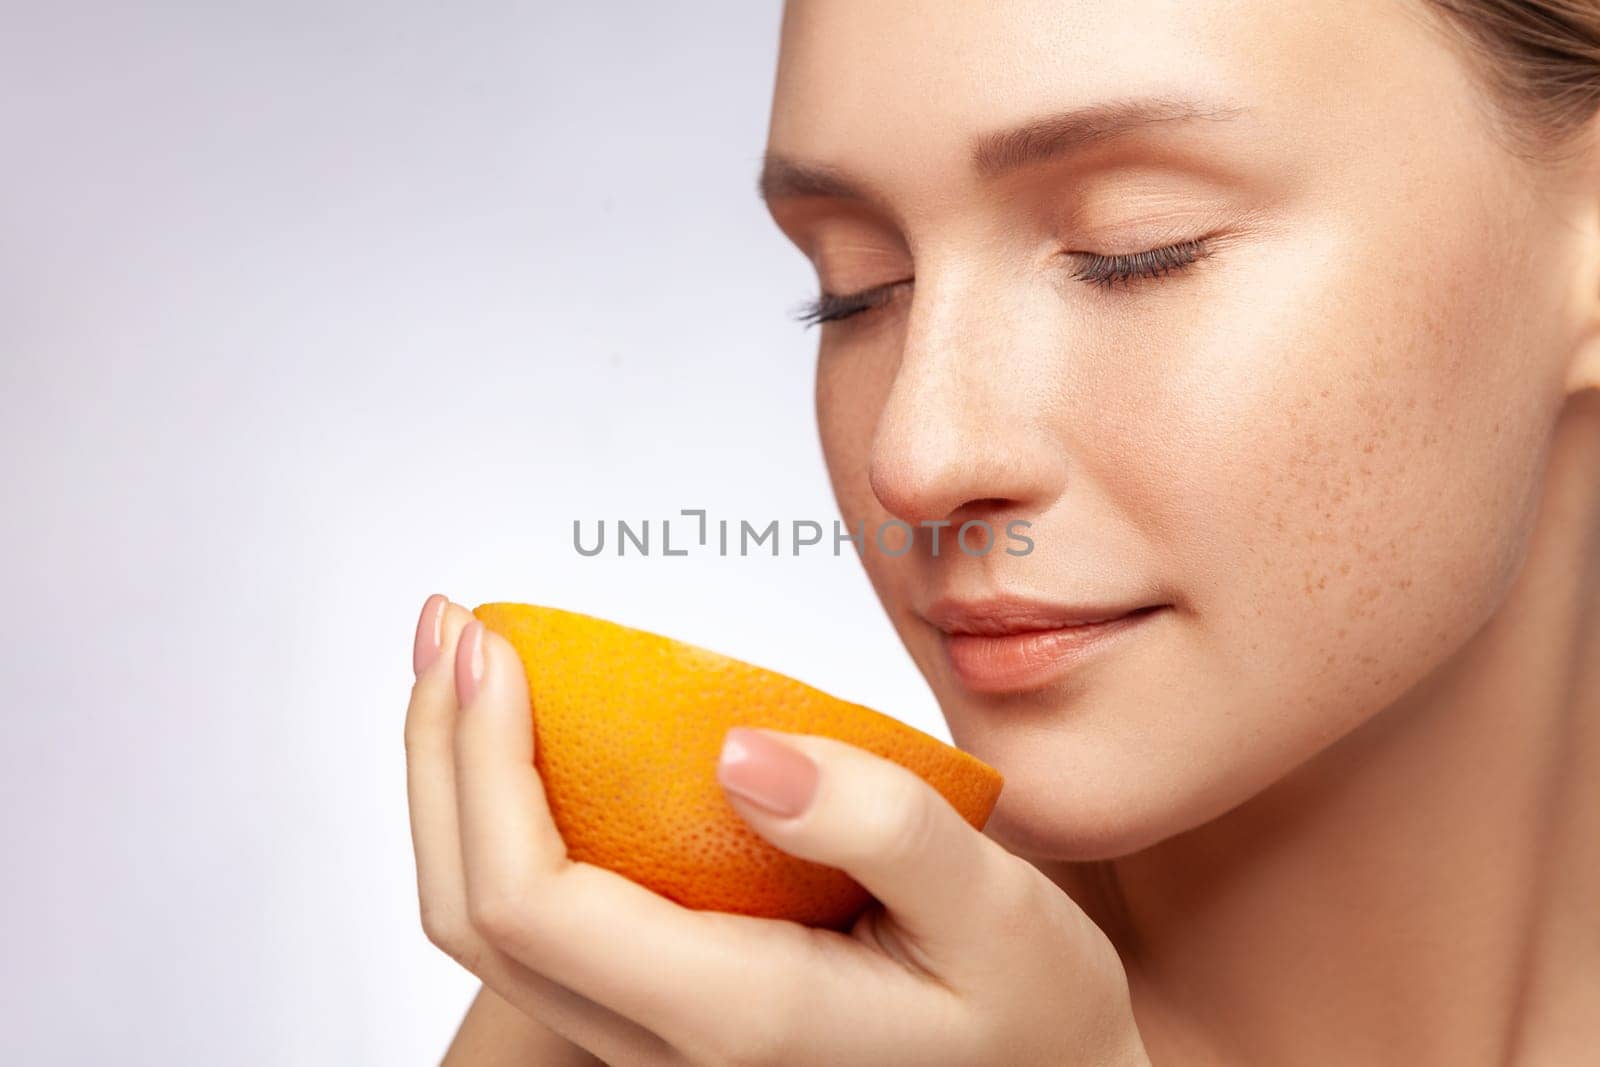 Closeup portrait of dreamy beautiful woman with closed eyes holding smelling half of grapefruit, model with natural makeup. Indoor studio shot isolated over gray background.